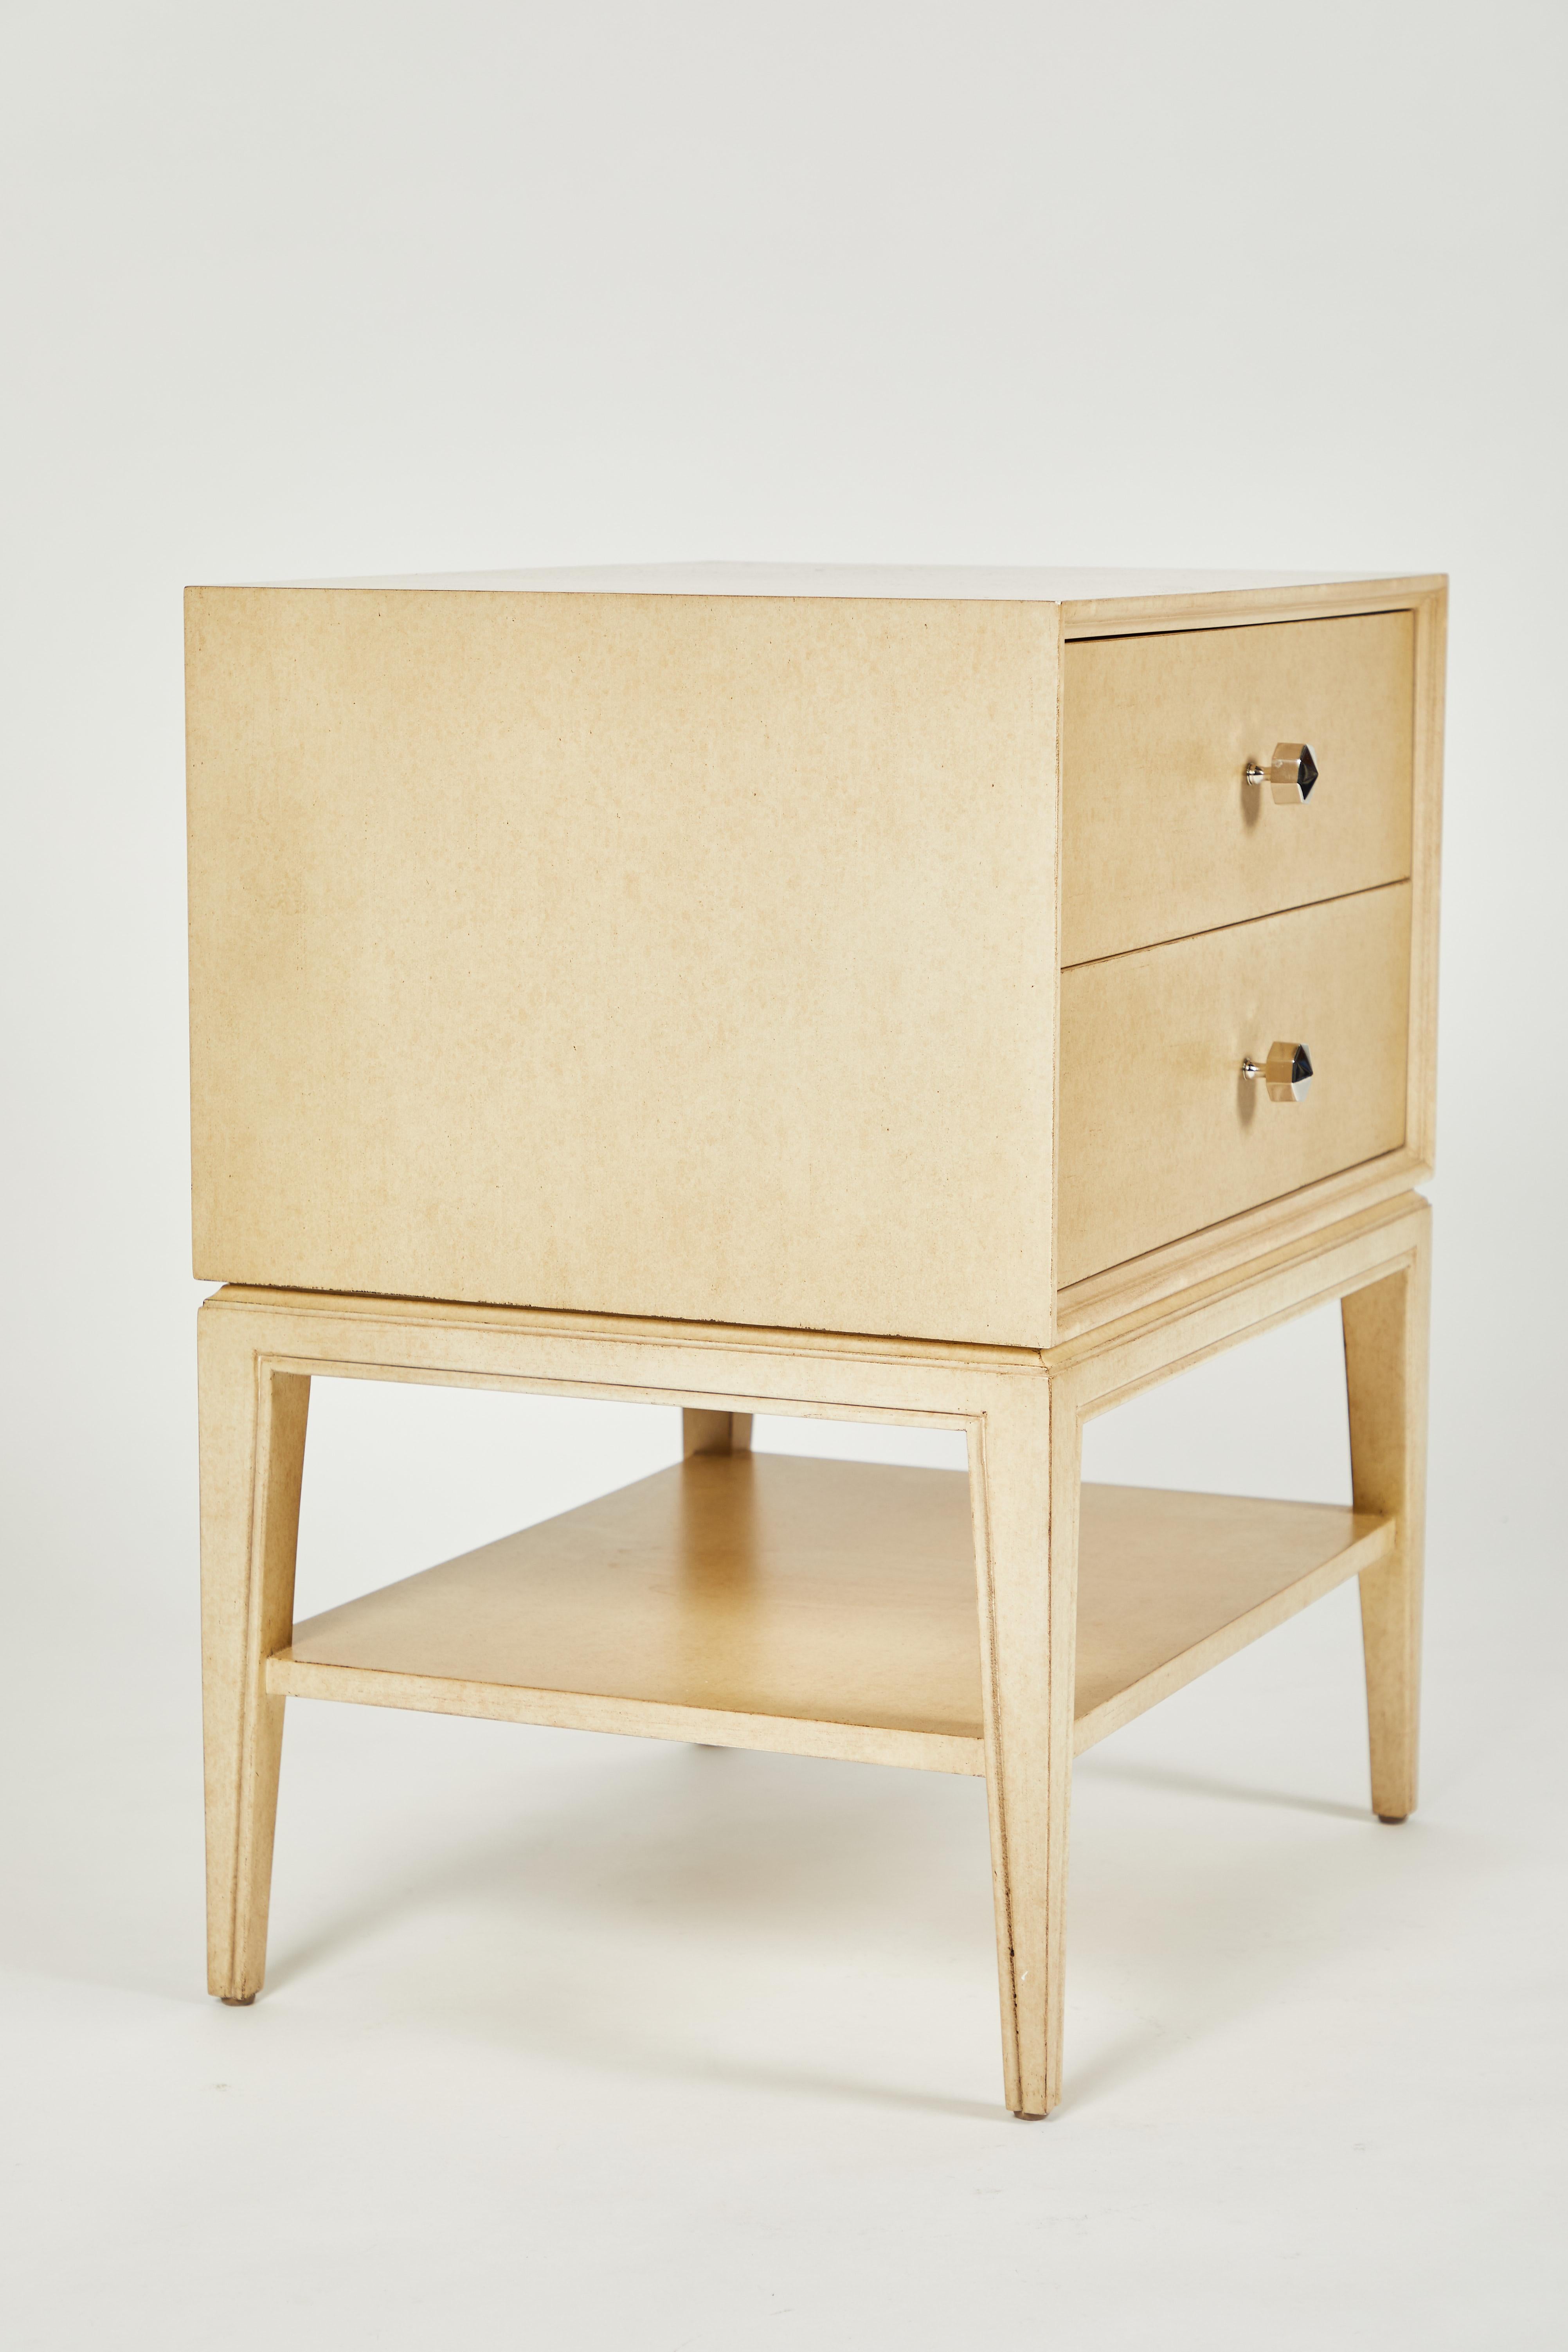 20th Century Rectangular Nightstand with 2 Drawers and Open Shelf For Sale